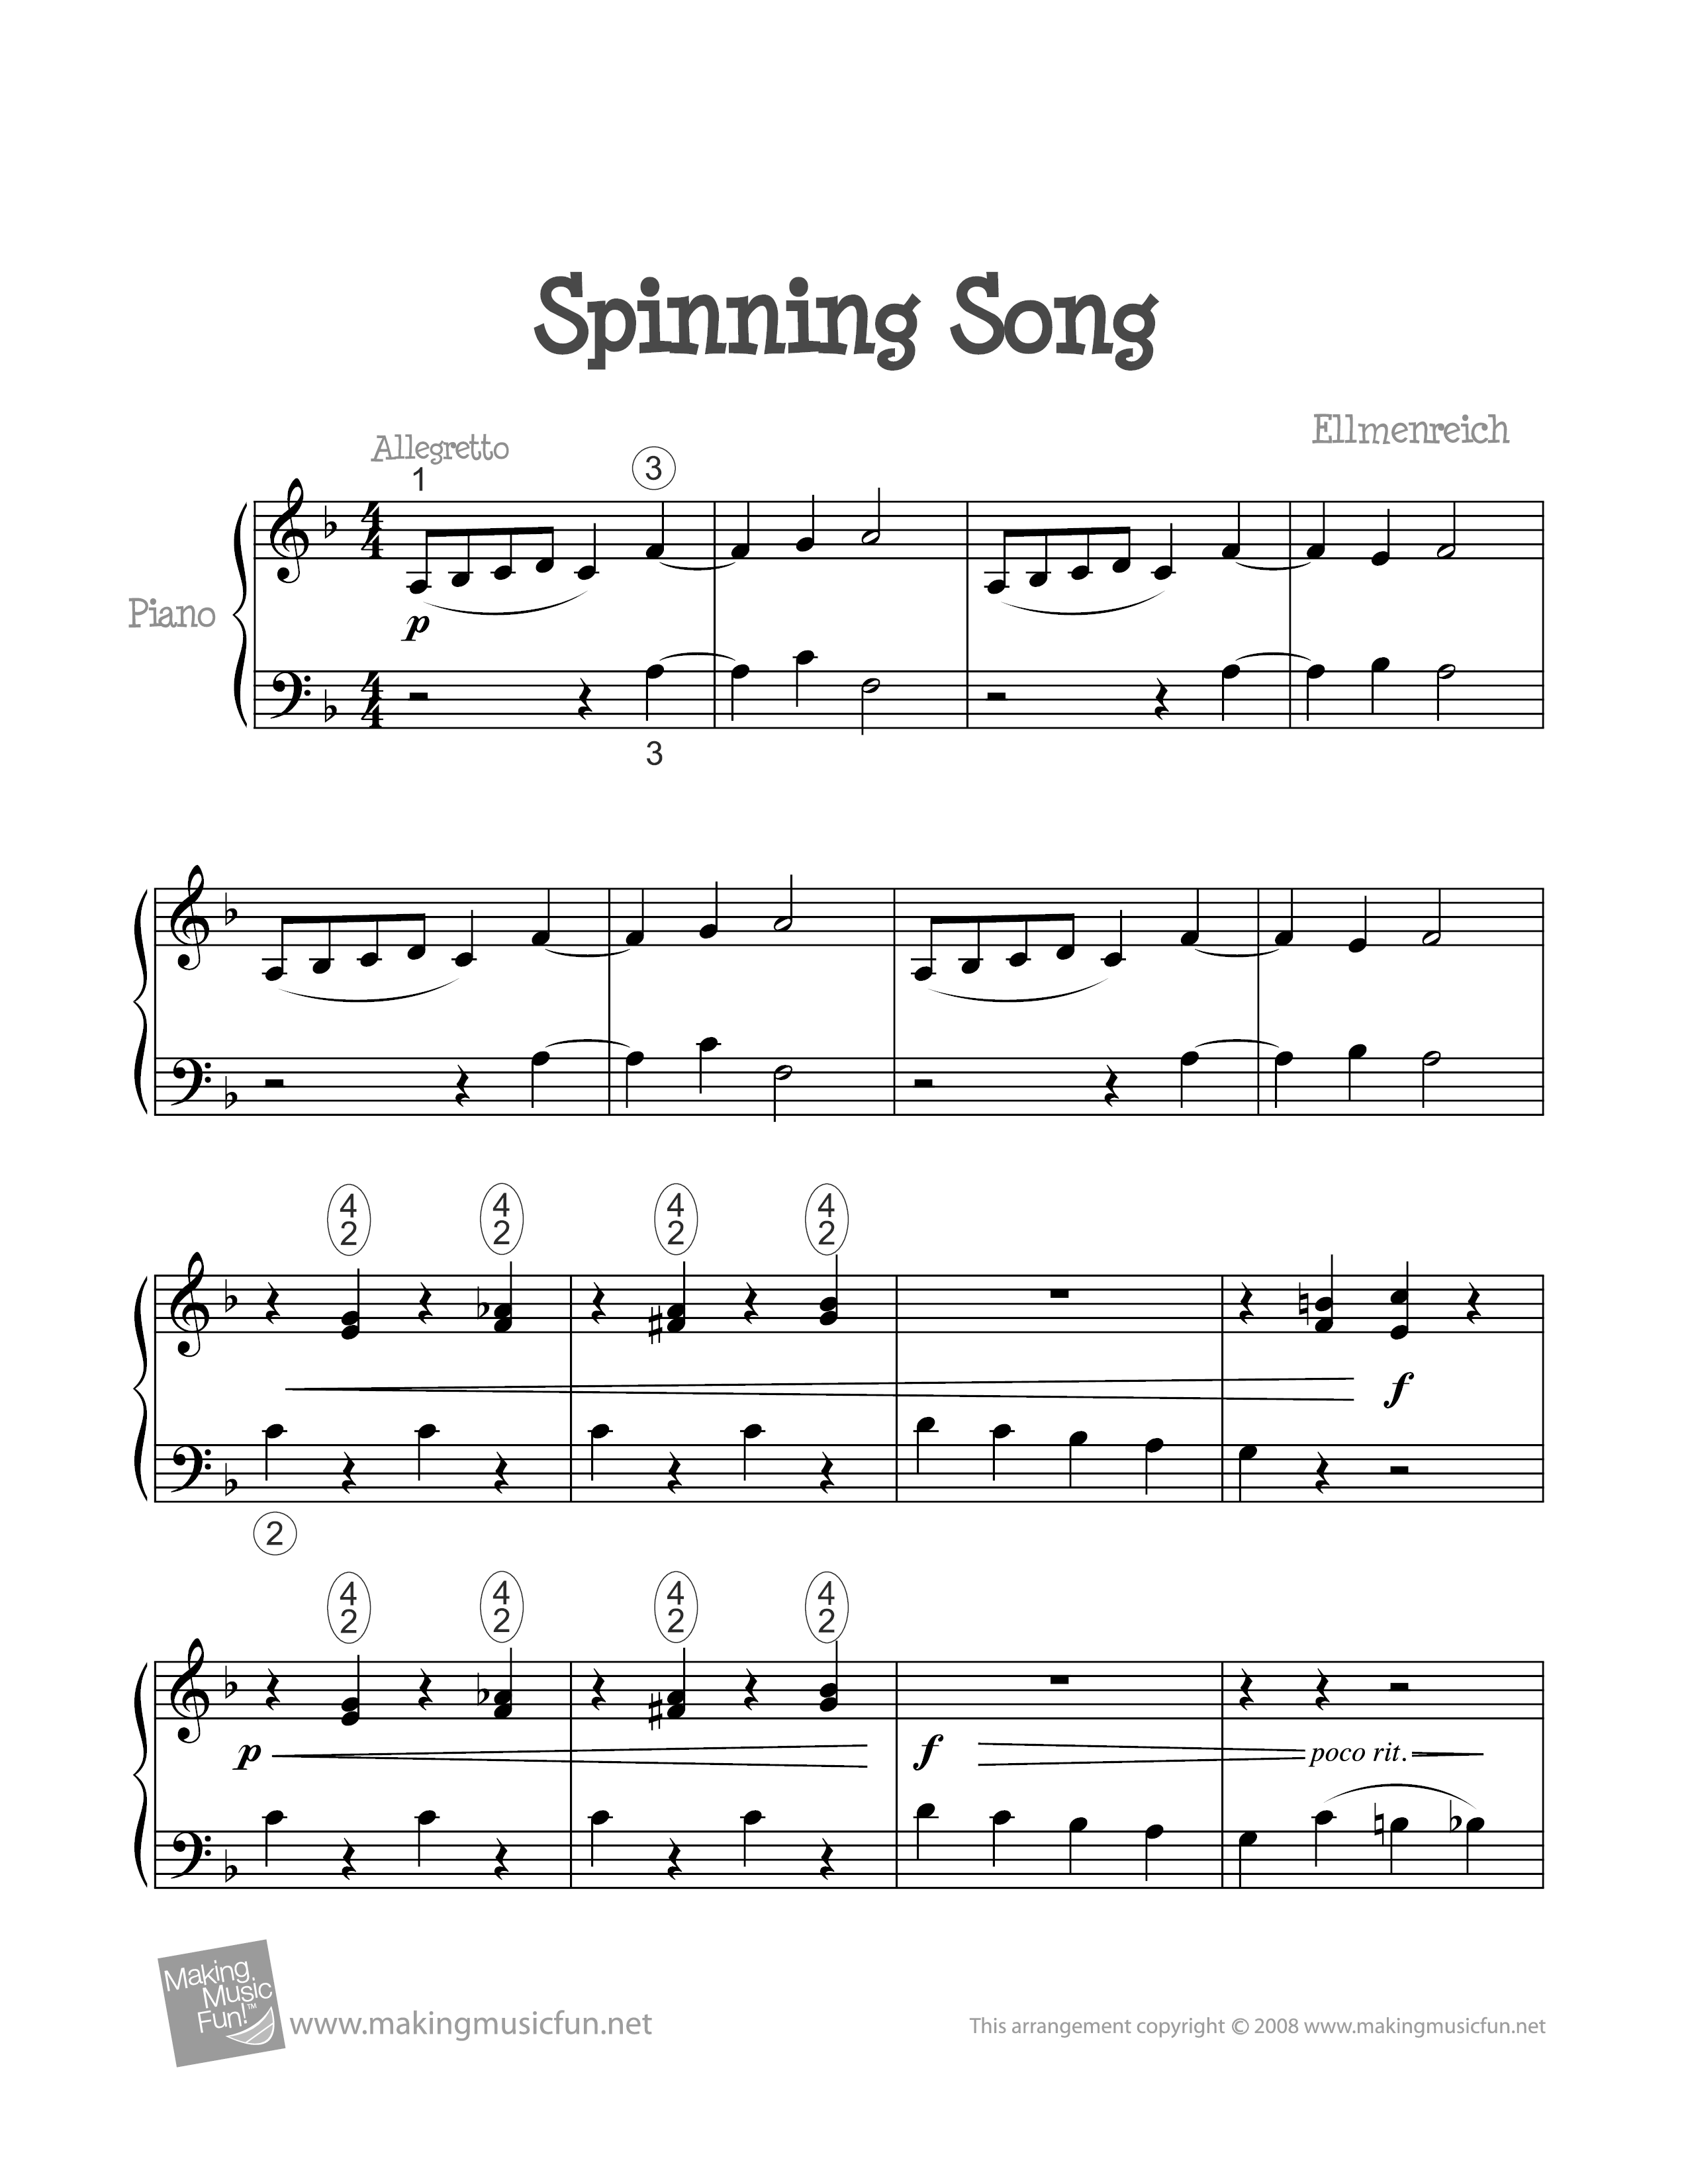 Spinning Song Score